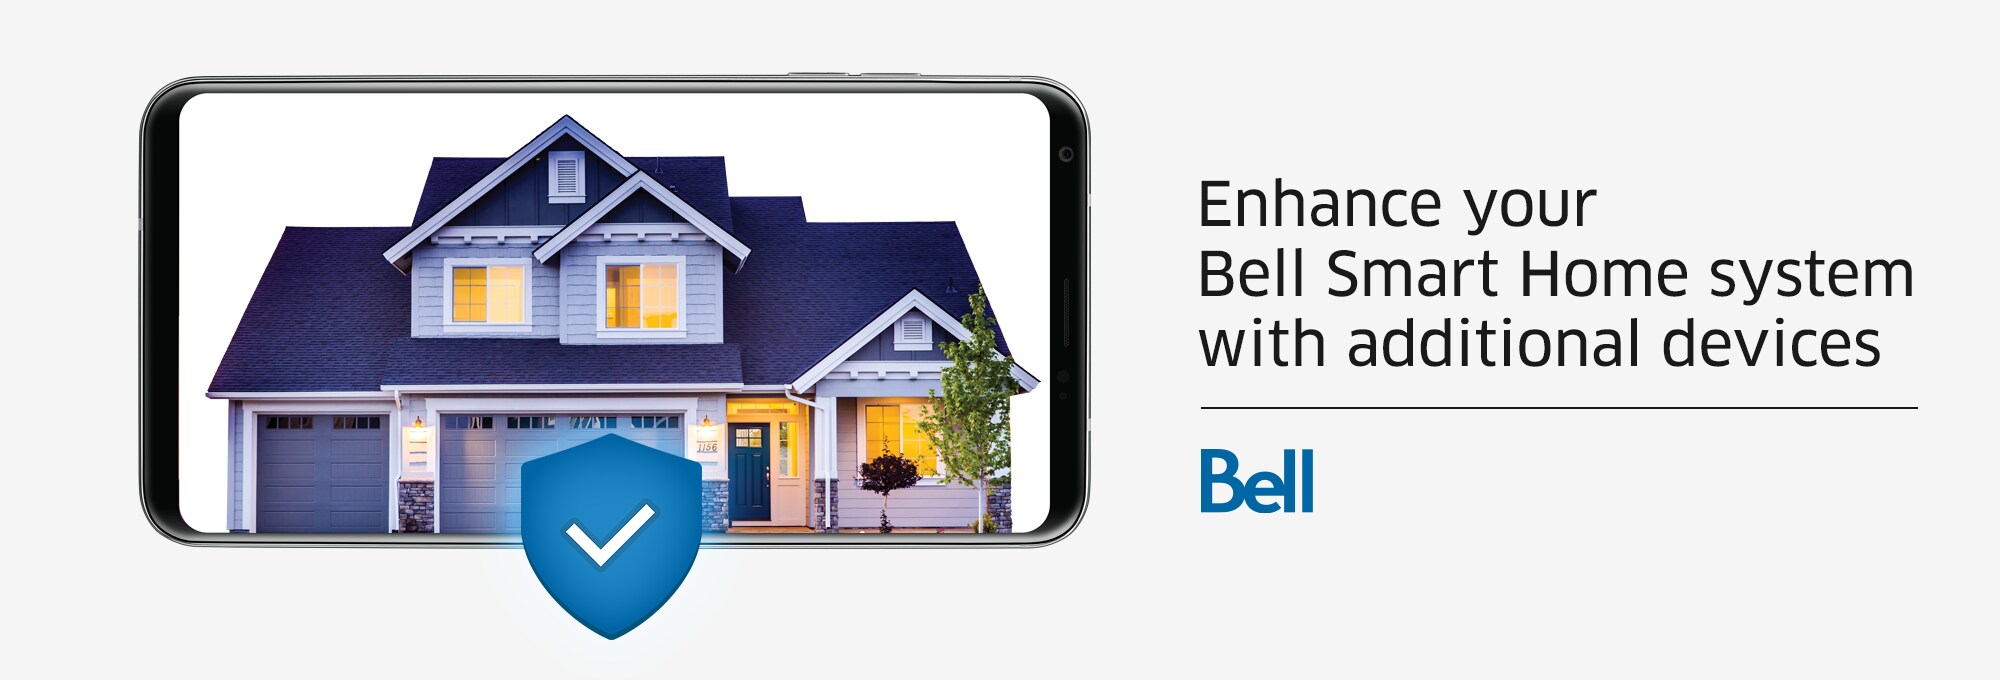 Enhance your Bell Smart Home system with additional devices